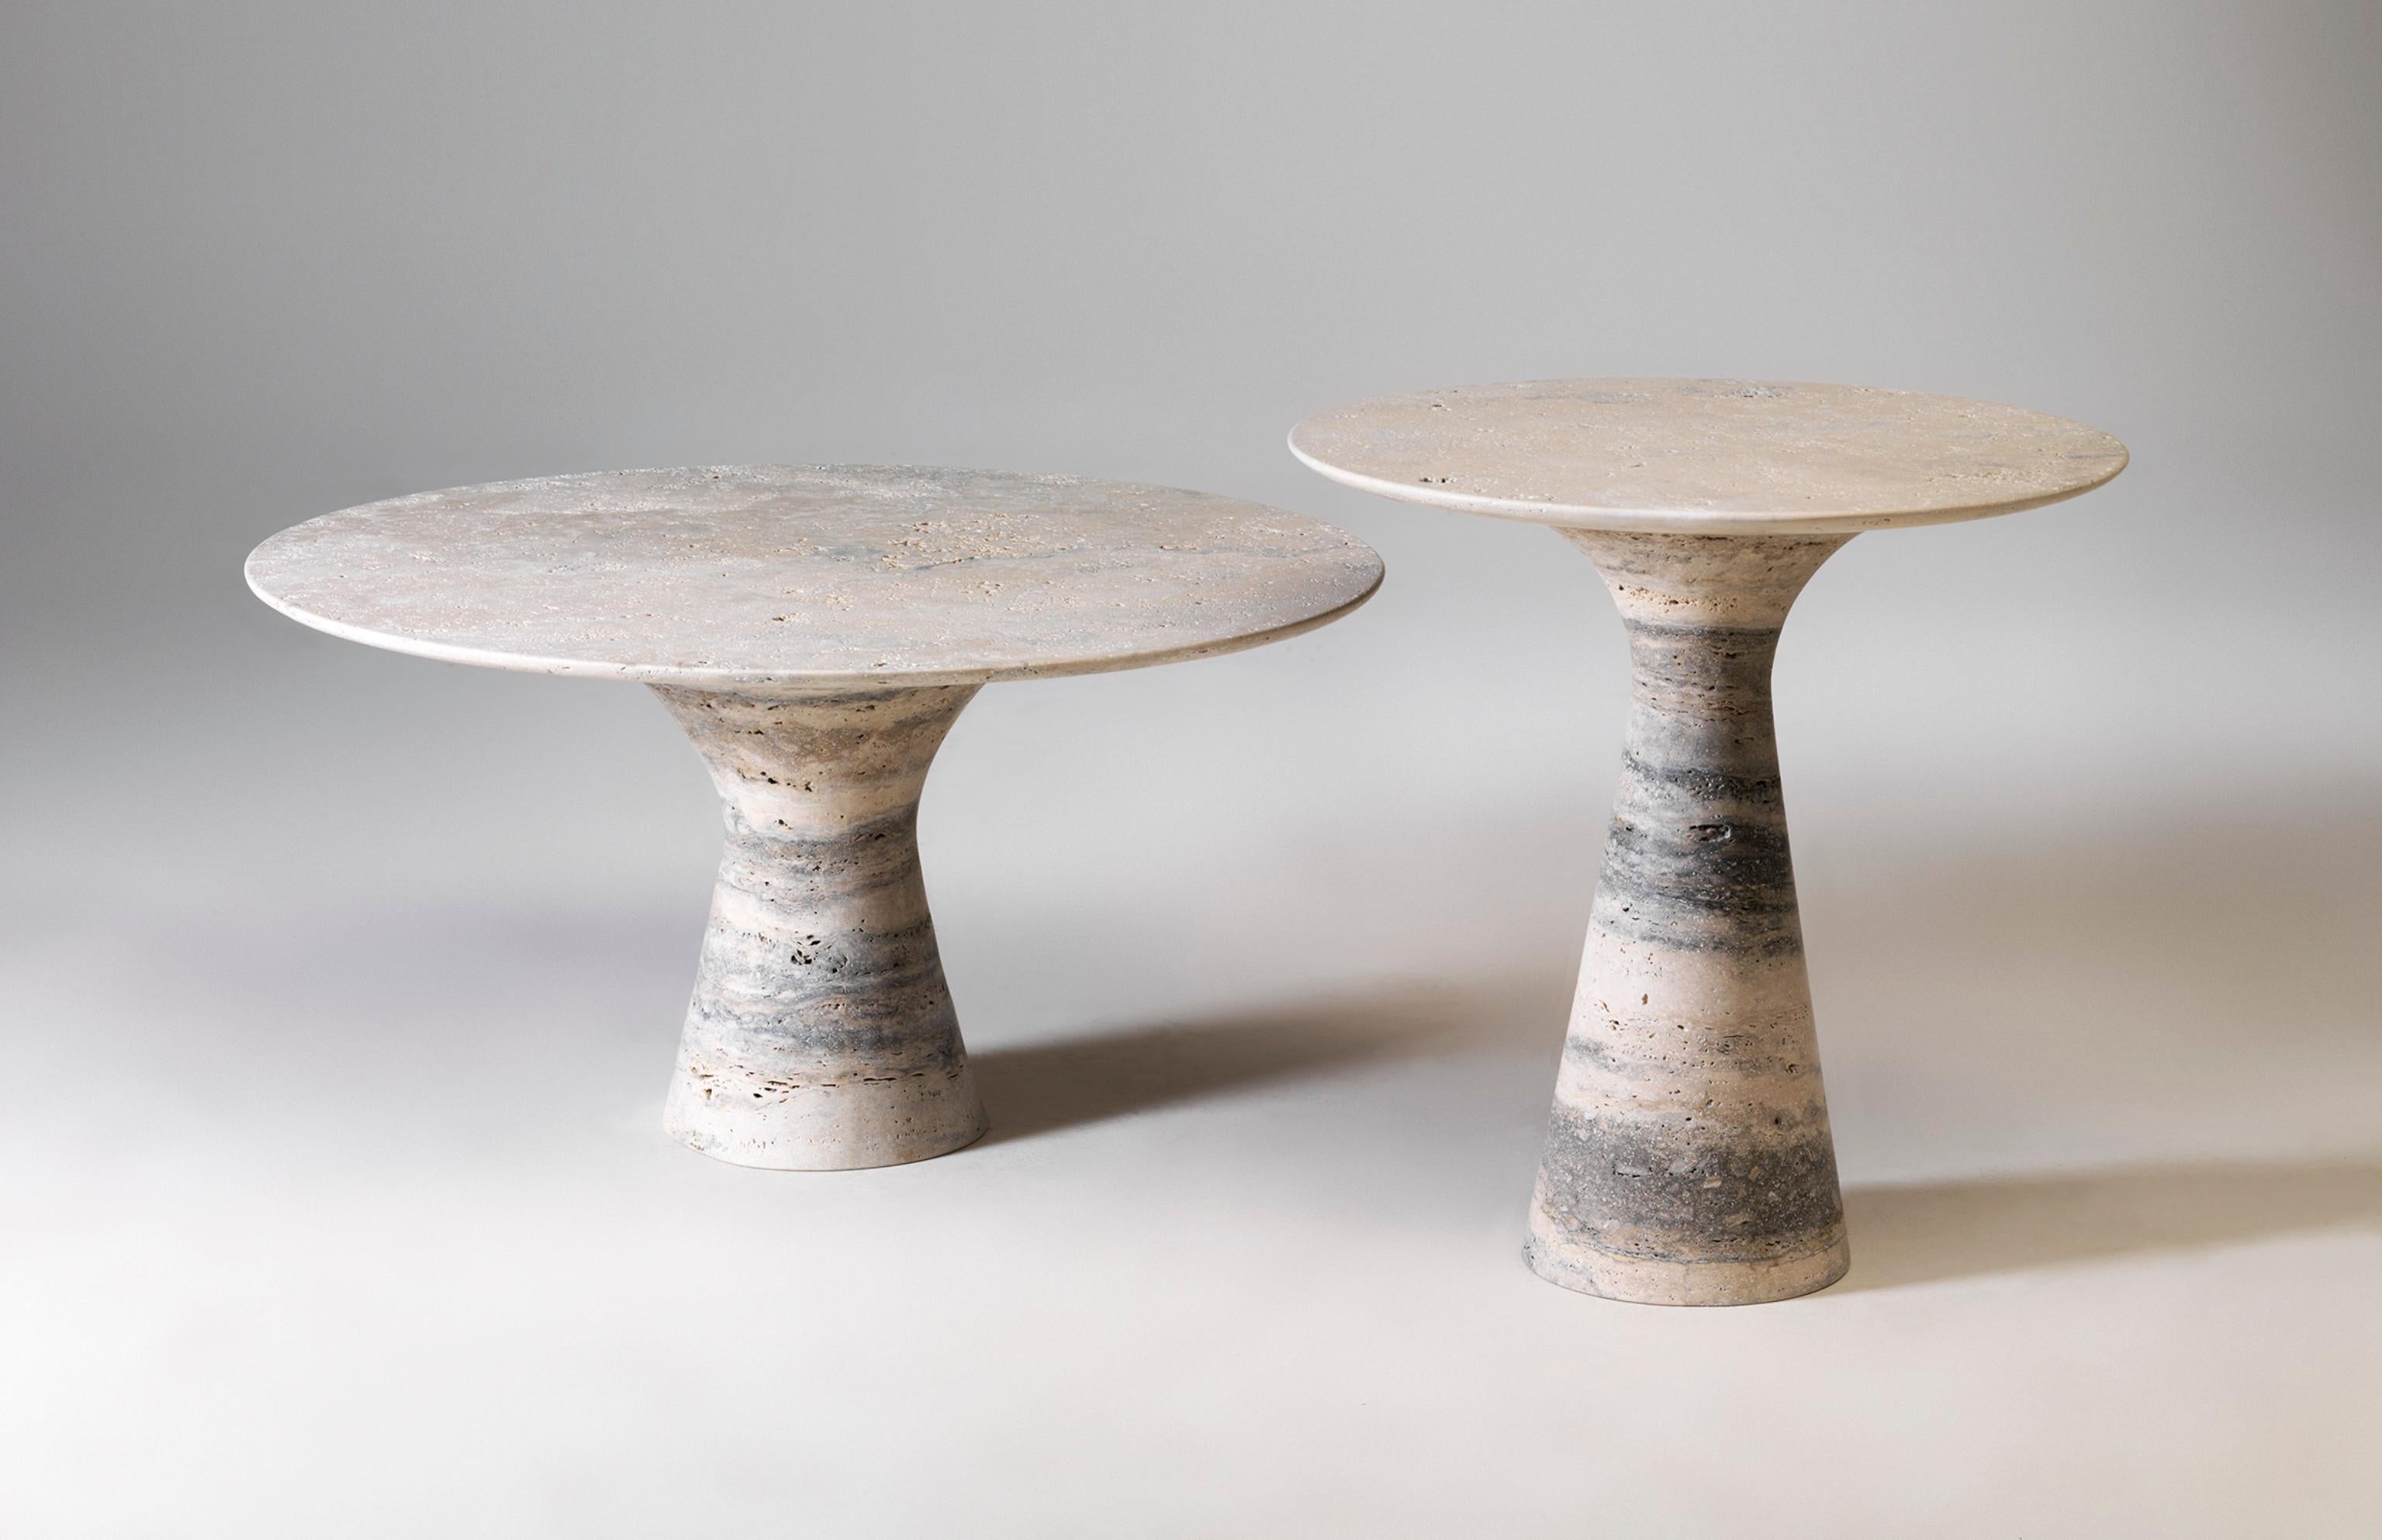 Refined Set of 3 Travertino silver contemporary marble side tables
Measures: Tall: 62 x 45 x 45 cm
Medium: 48 x 55 x 55 cm
Short: 36 x 80 x 80 cm
Materials: Travertino Silver marble

Angelo is the essence of a round table in natural stone, a